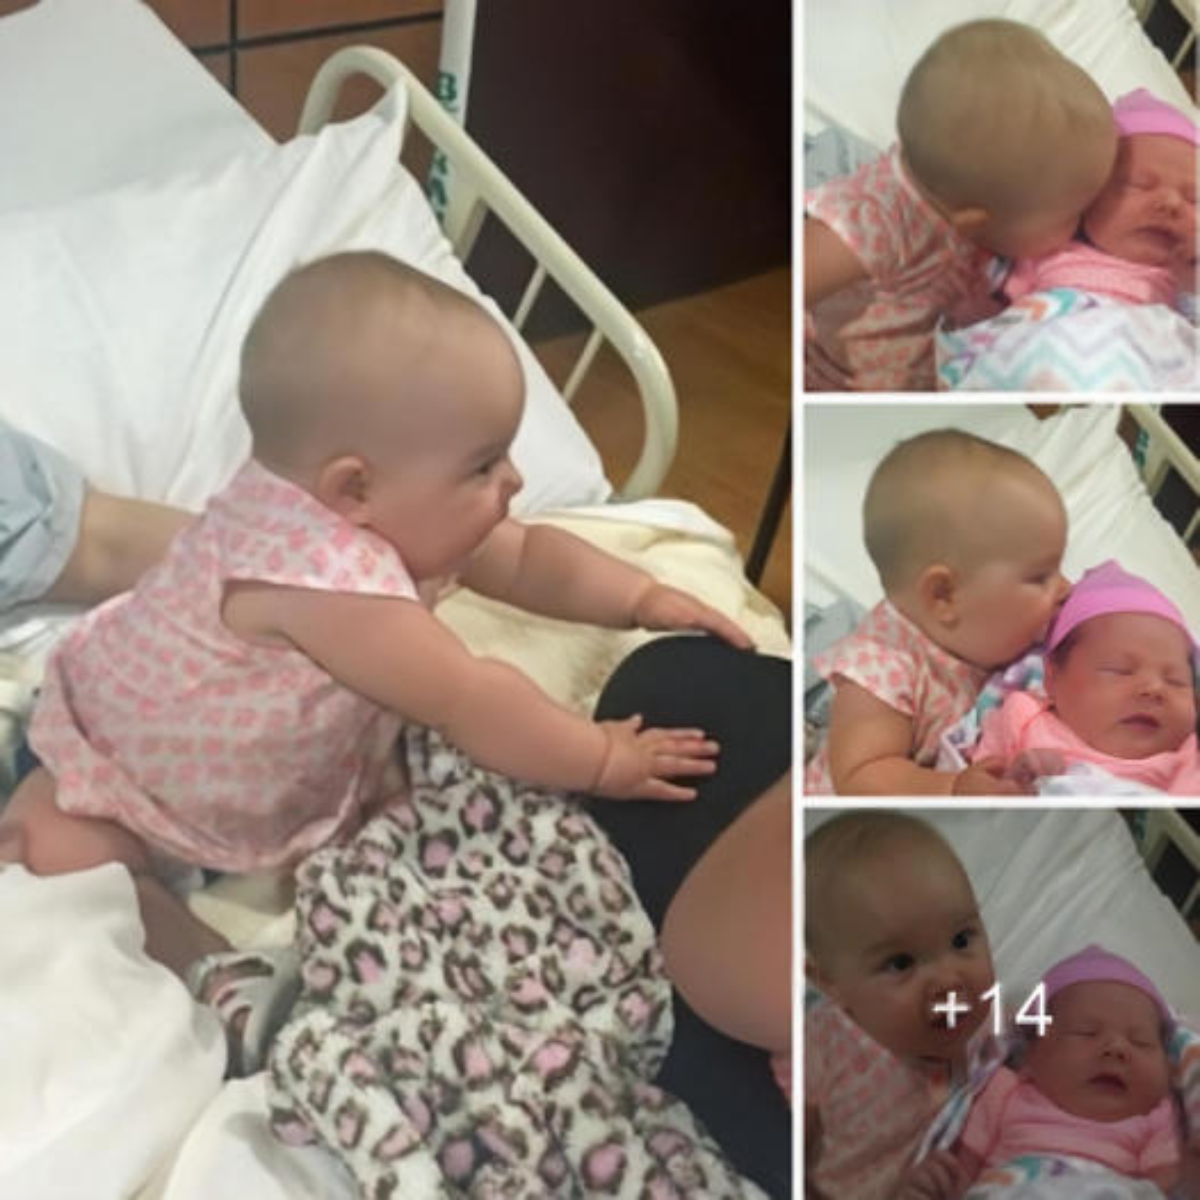 Witnesses were left in shock when an 8-month-old baby girl unexpectedly ...